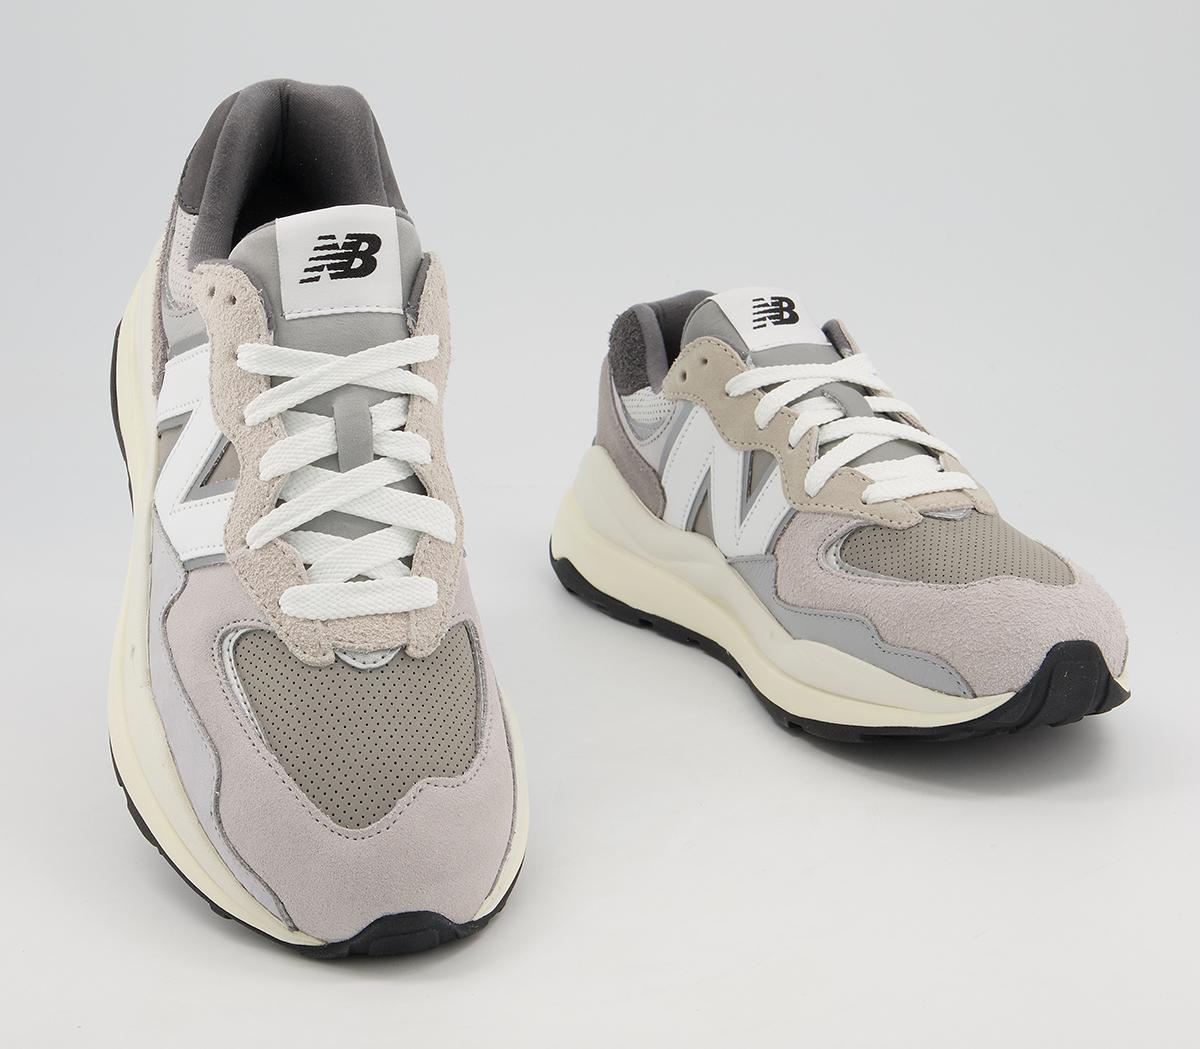 New Balance M5740 Trainers Grey White - His trainers